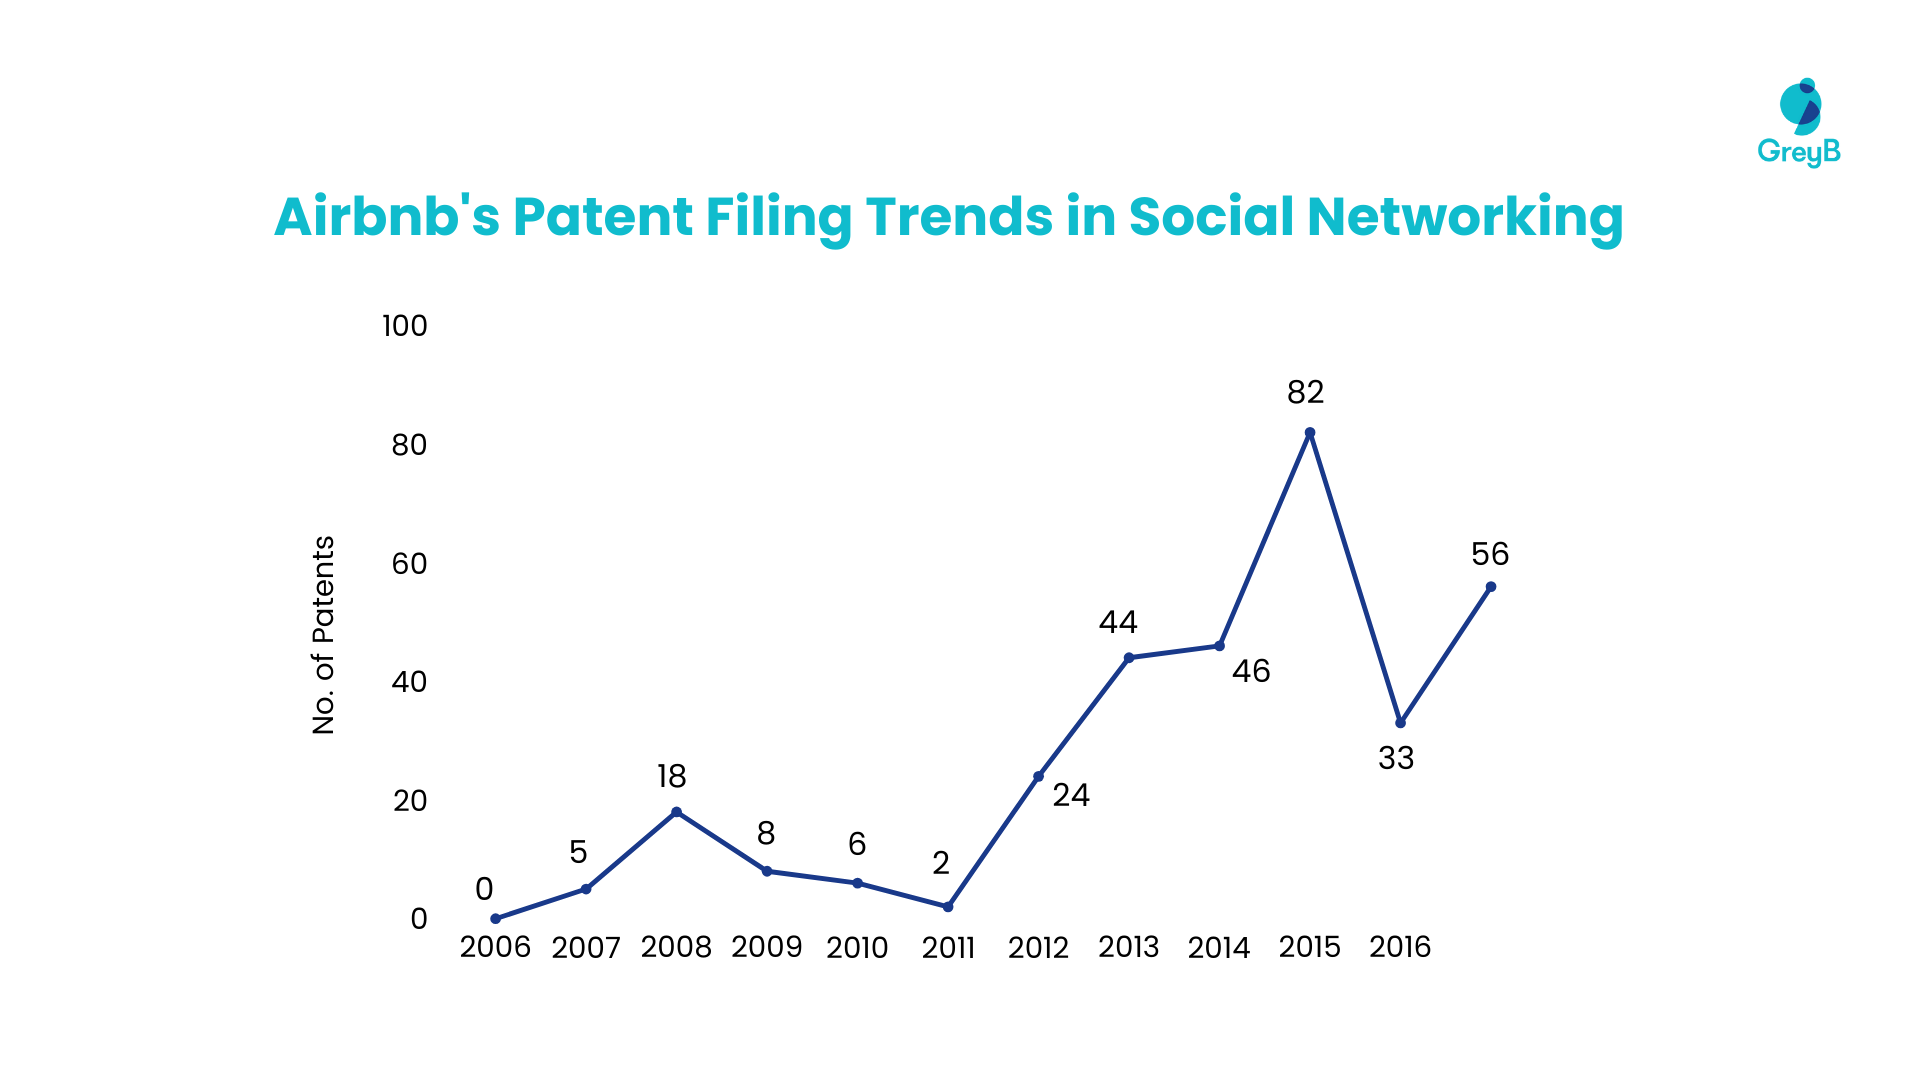 Airbnb's Patent Filing Trends in Social Networking